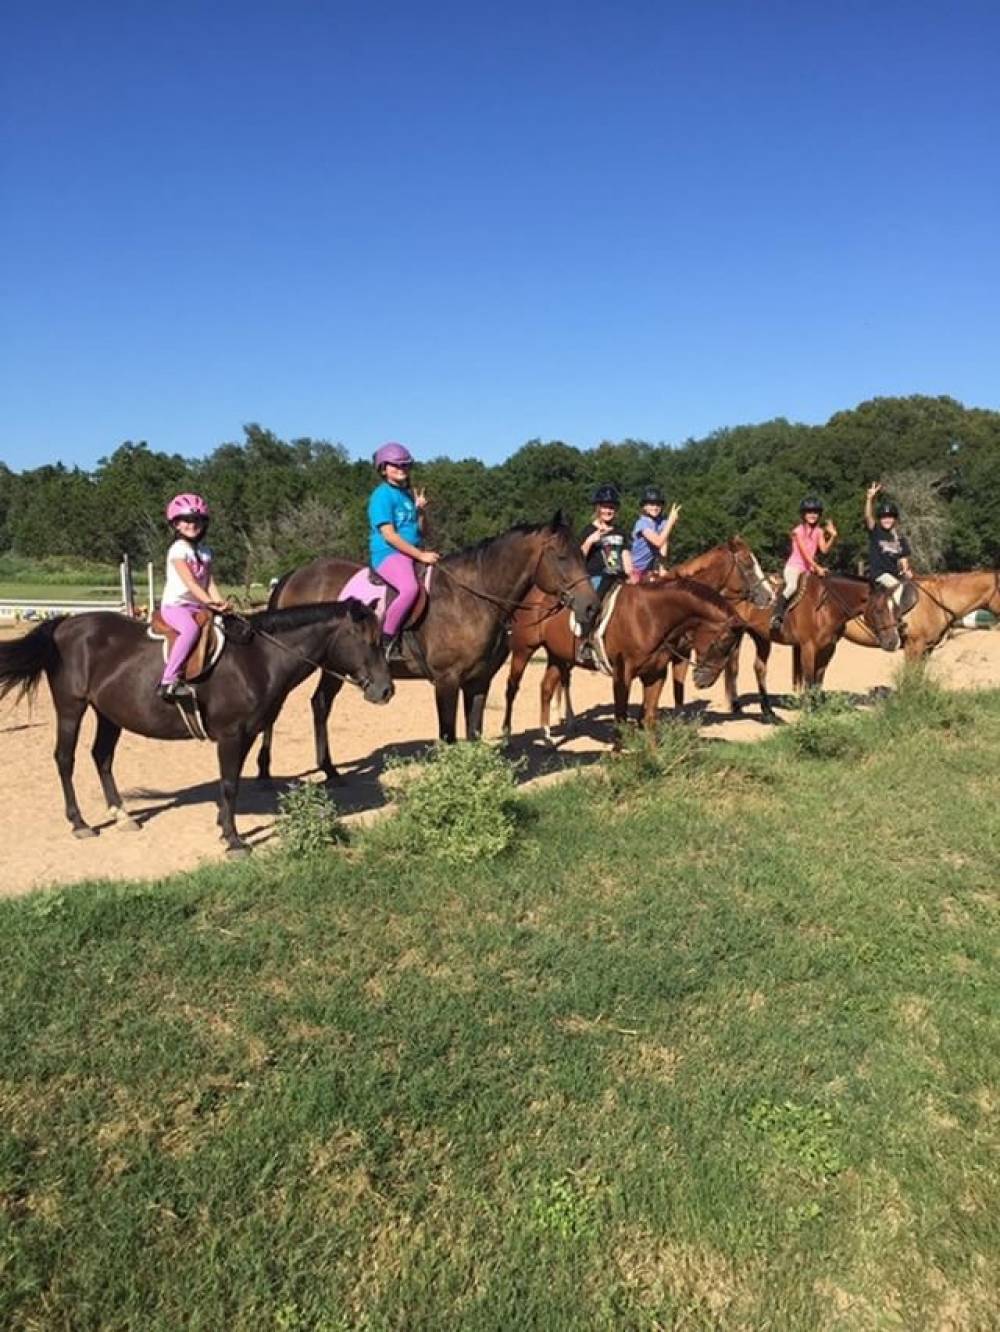 TOP TEXAS LEADERSHIP CAMP: Hunters Chase Farms Inc. is a Top Leadership Summer Camp located in Wimberley Texas offering many fun and enriching Leadership and other camp programs. Hunters Chase Farms Inc. also offers CIT/LIT and/or Teen Leadership Opportunities, too.